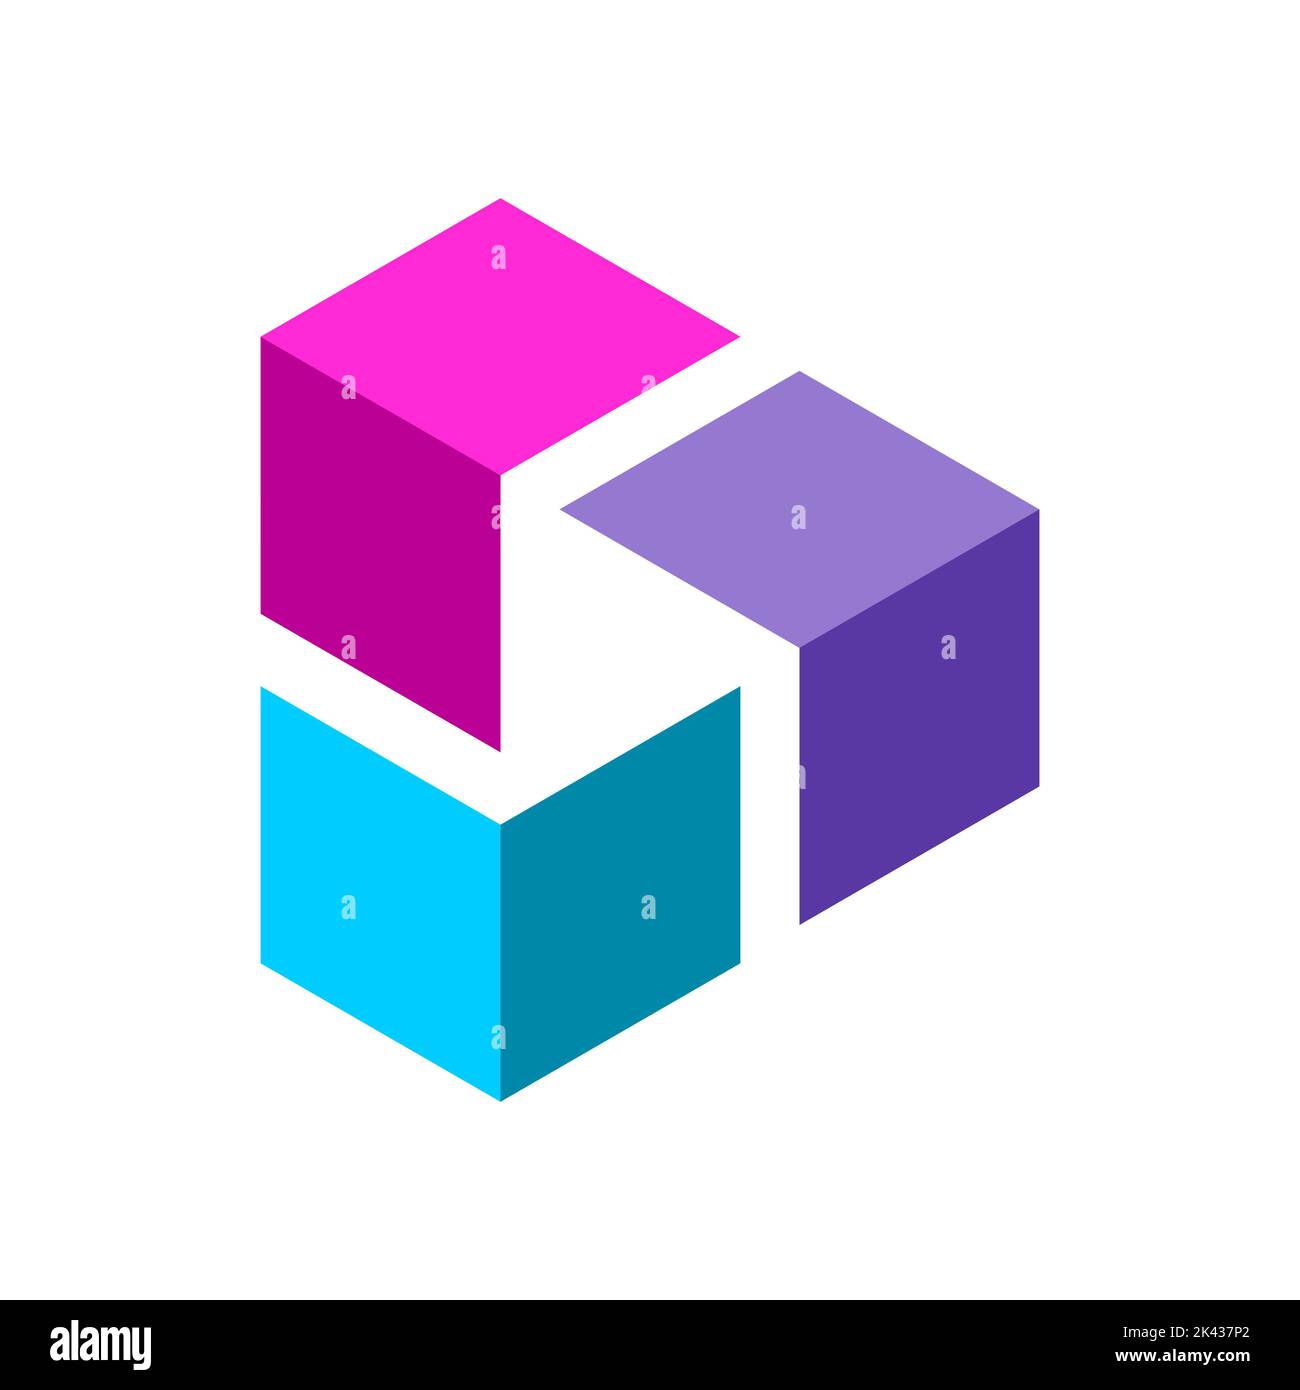 Play triangle symbol inside 3D cube elements. Isometric block shapes make unity. Colorful business logo. Technology media industry. Play button Vector Stock Vector